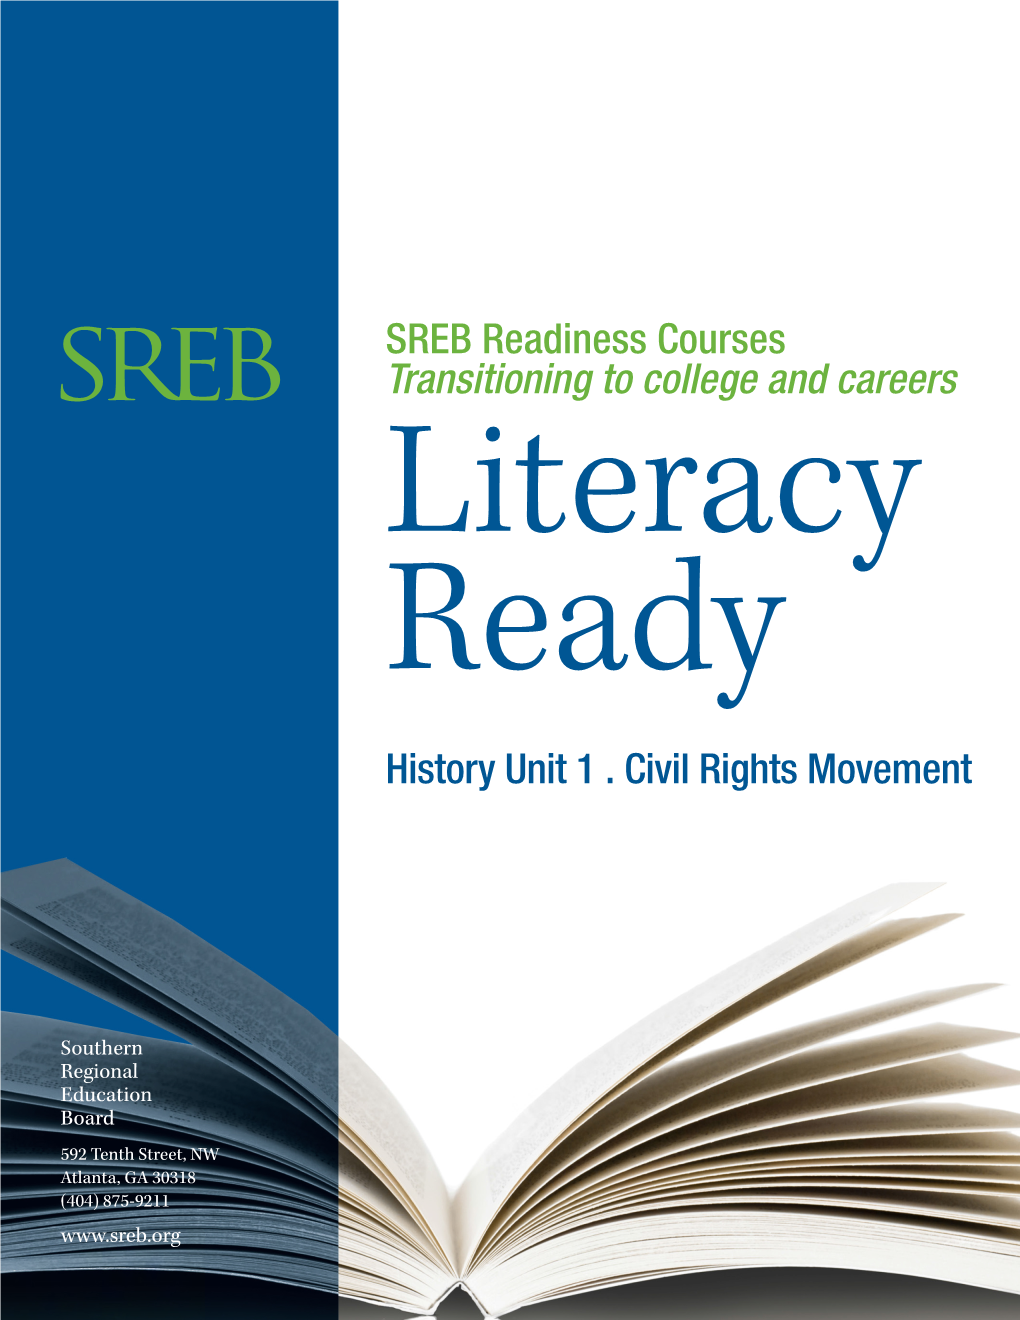 SREB Readiness Courses Transitioning to College and Careers Literacy Ready History Unit 1